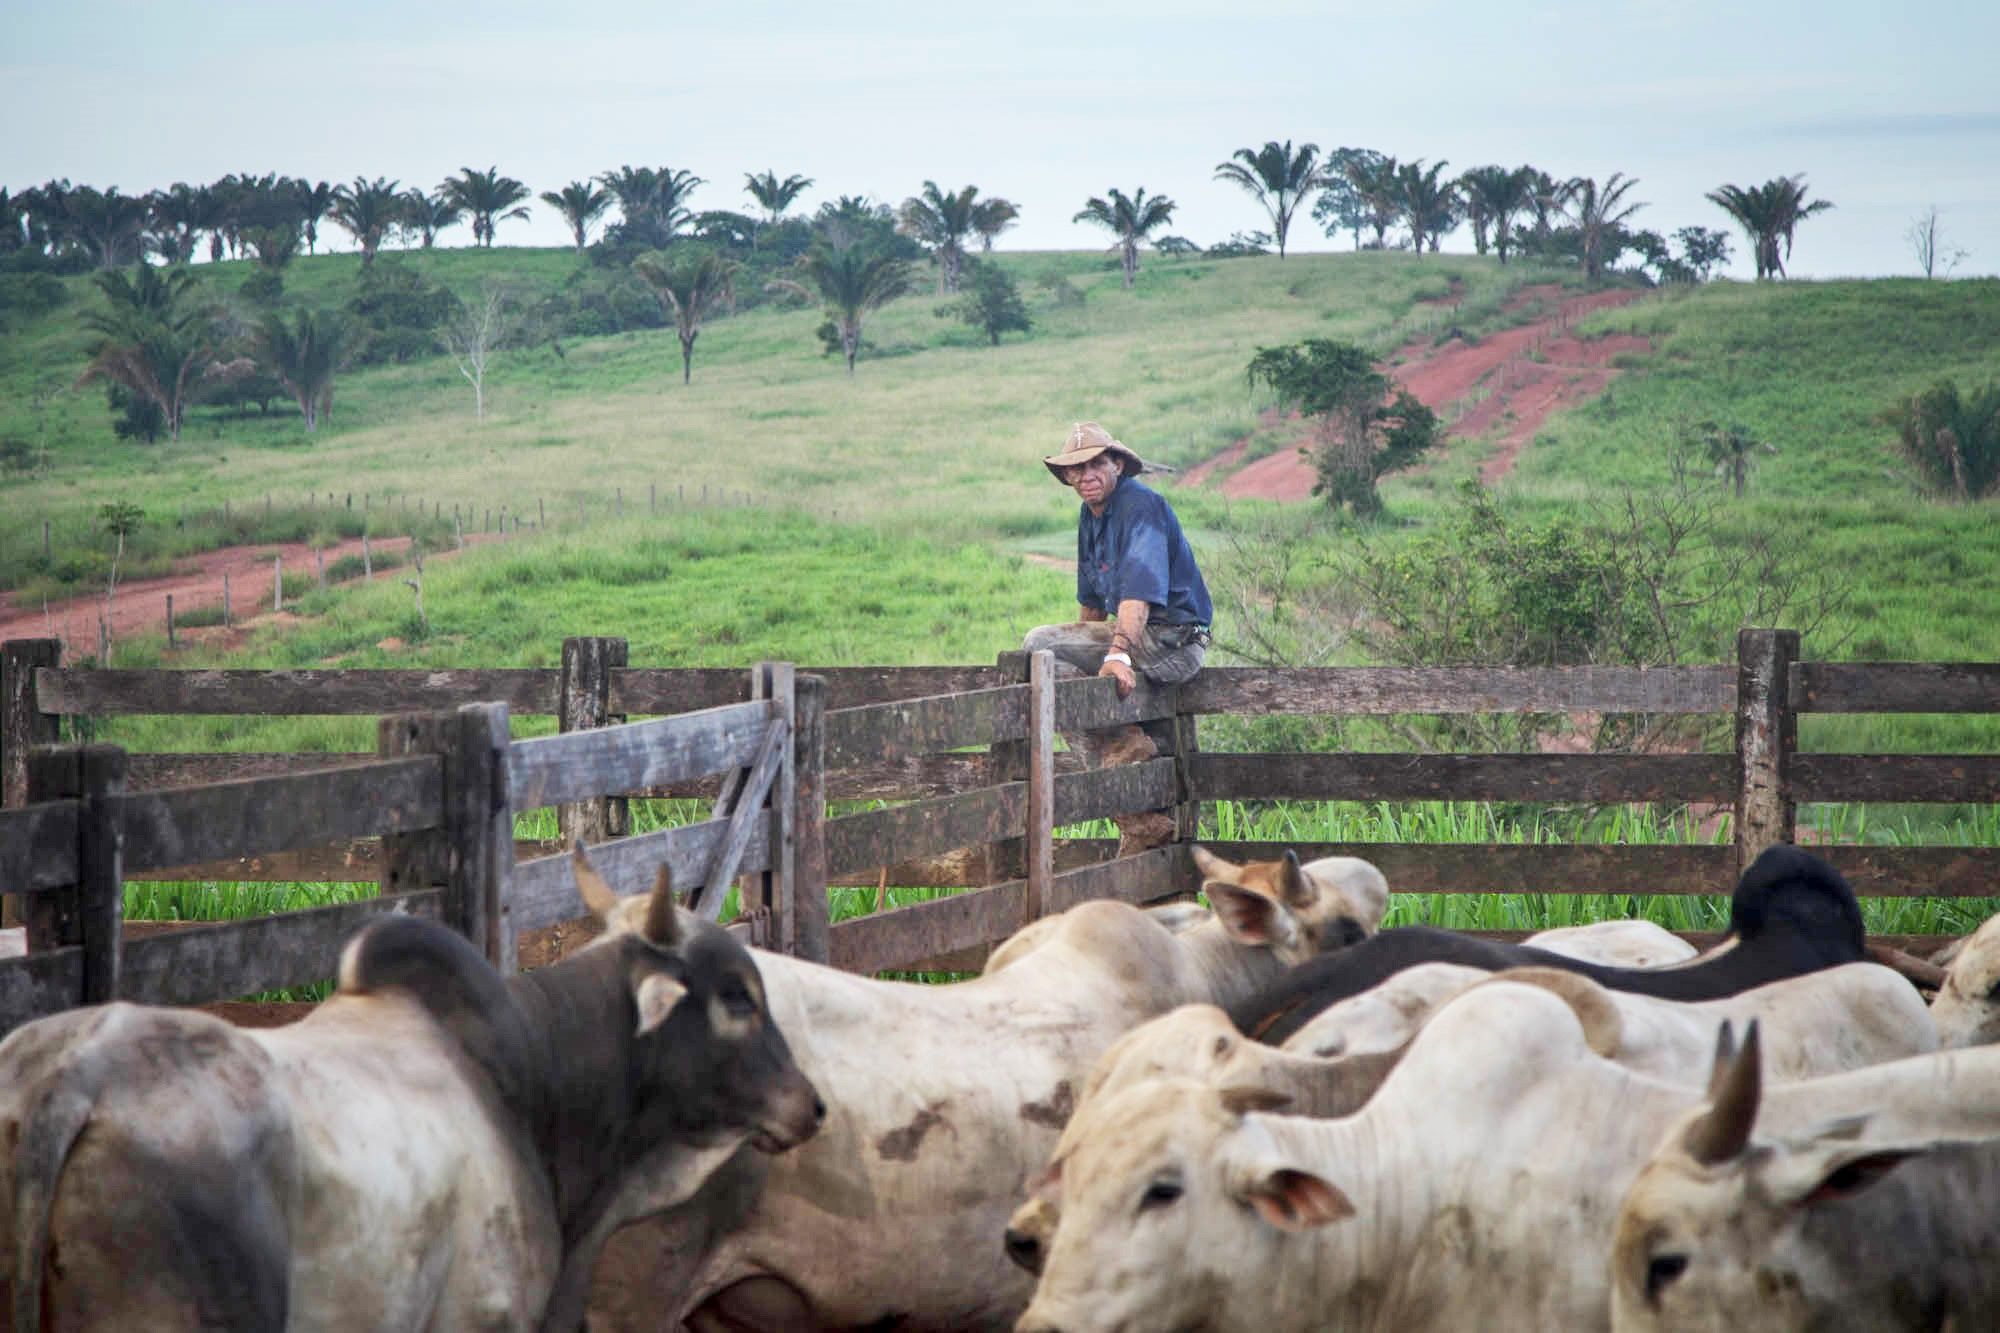 Cattle rancher with his cattle.